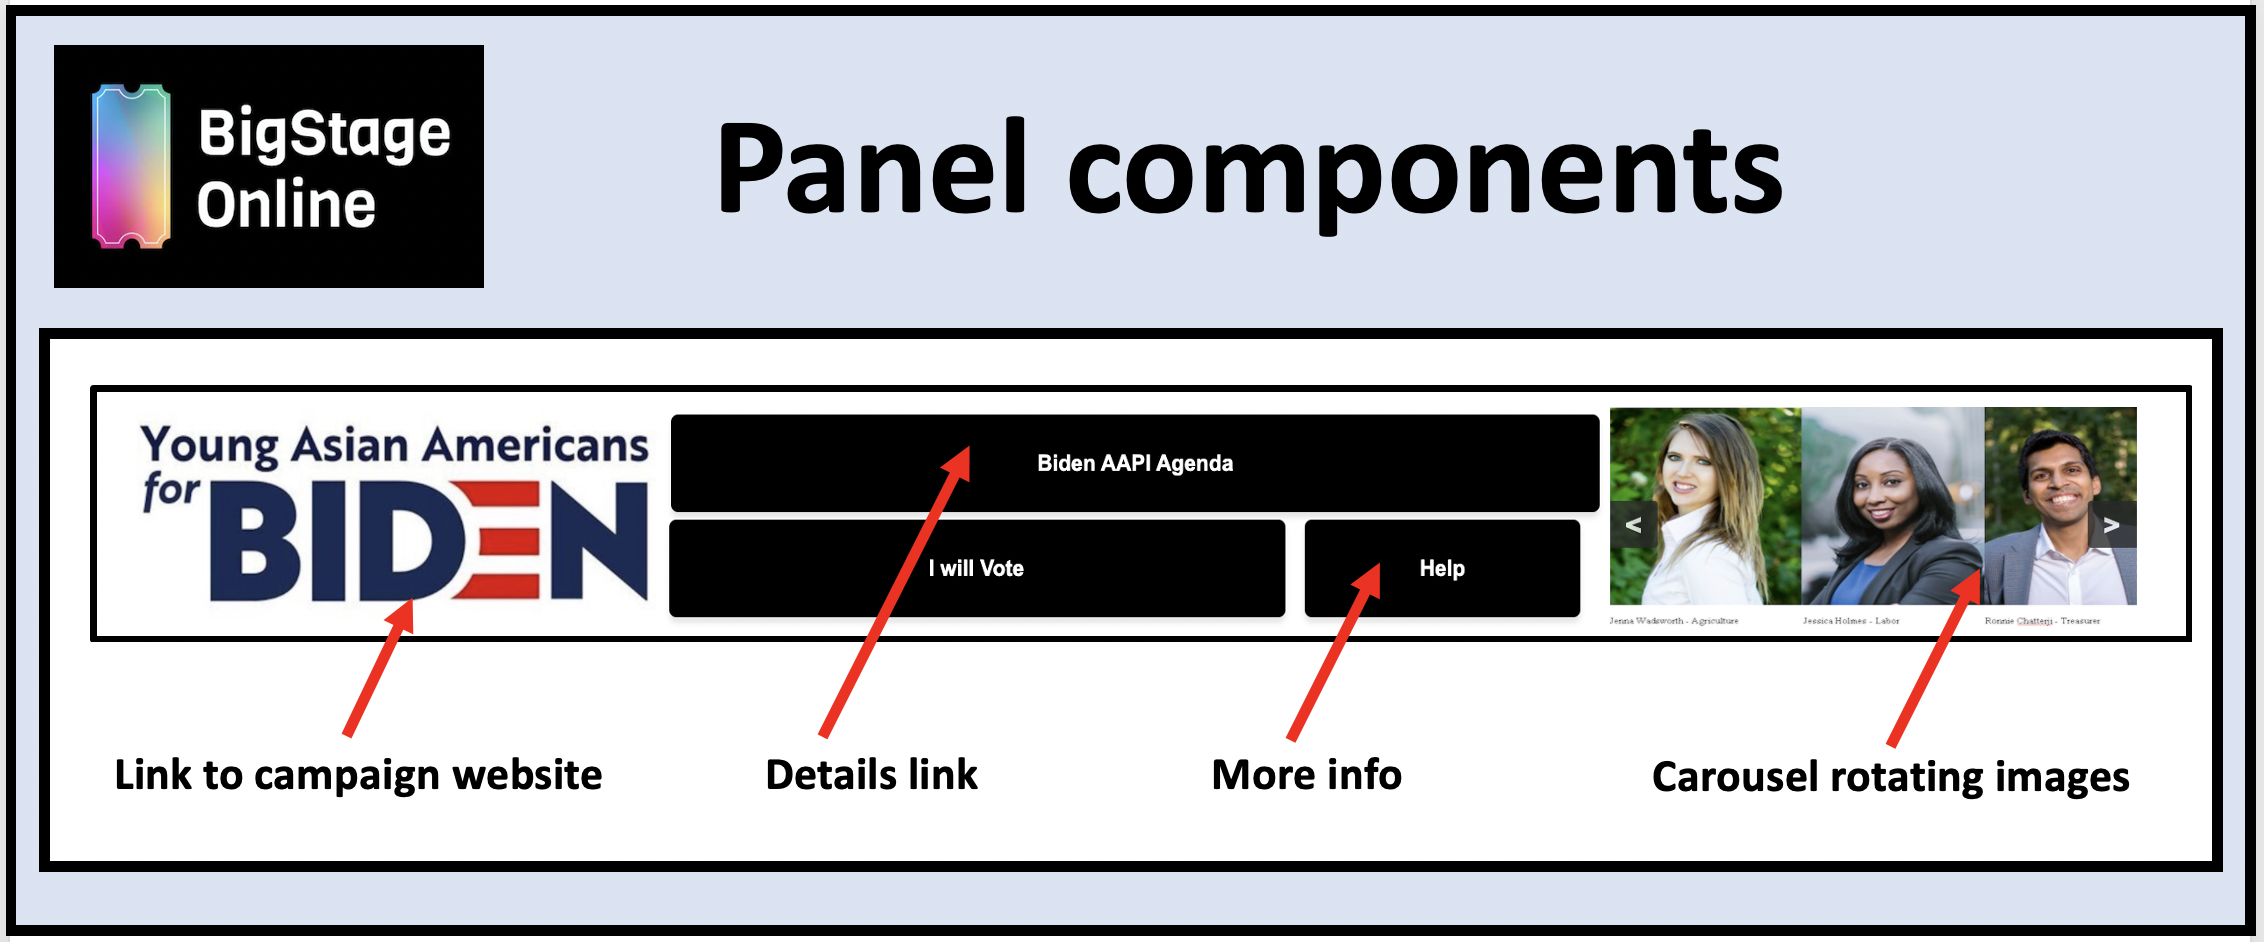 BigStage panel components that define the images to be shown and the websites they connect to.